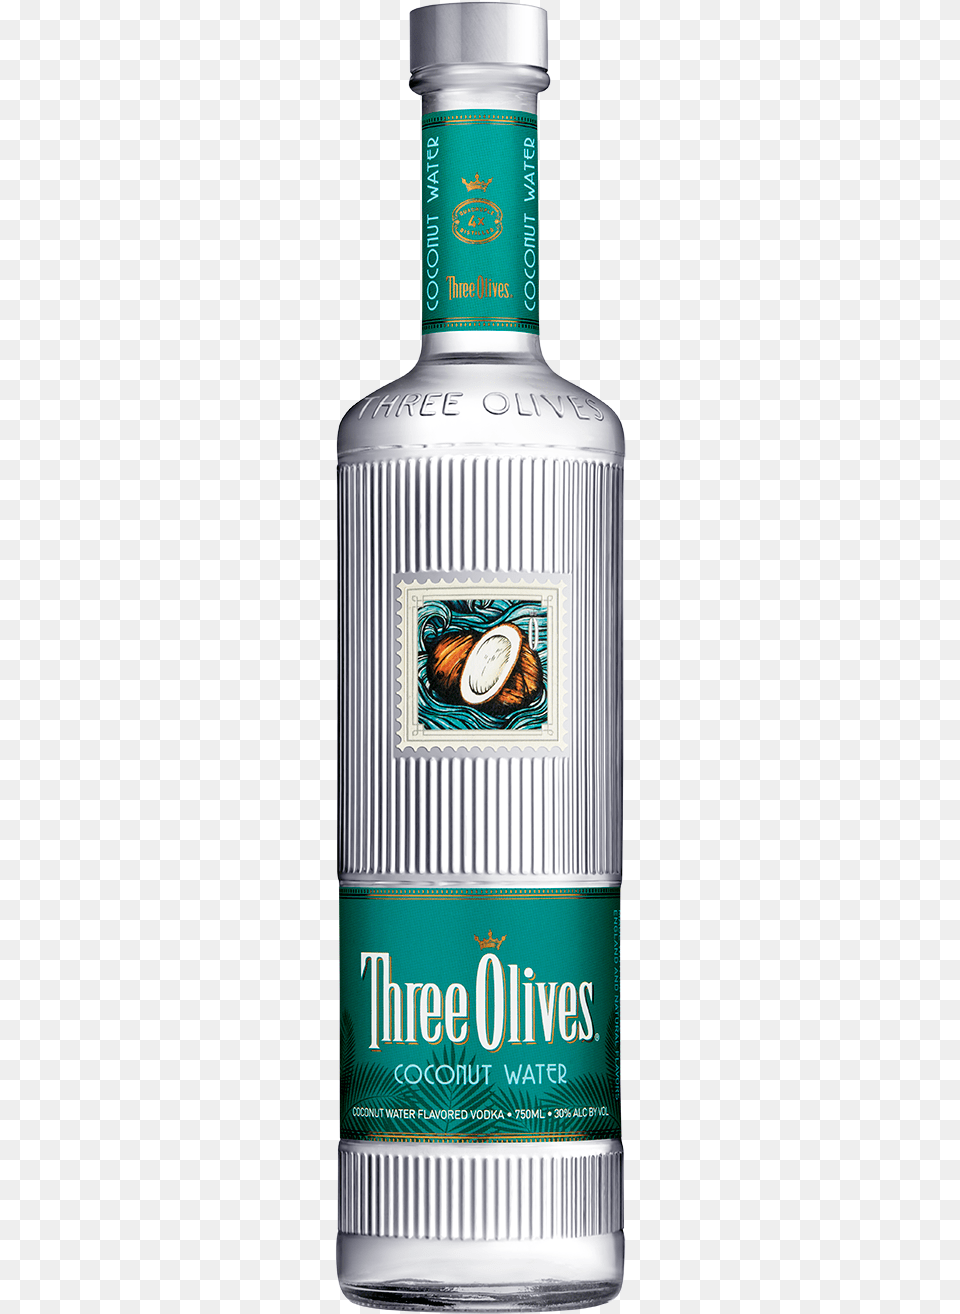 Three Olives Coconut Water Vodka, Alcohol, Beverage, Gin, Liquor Png